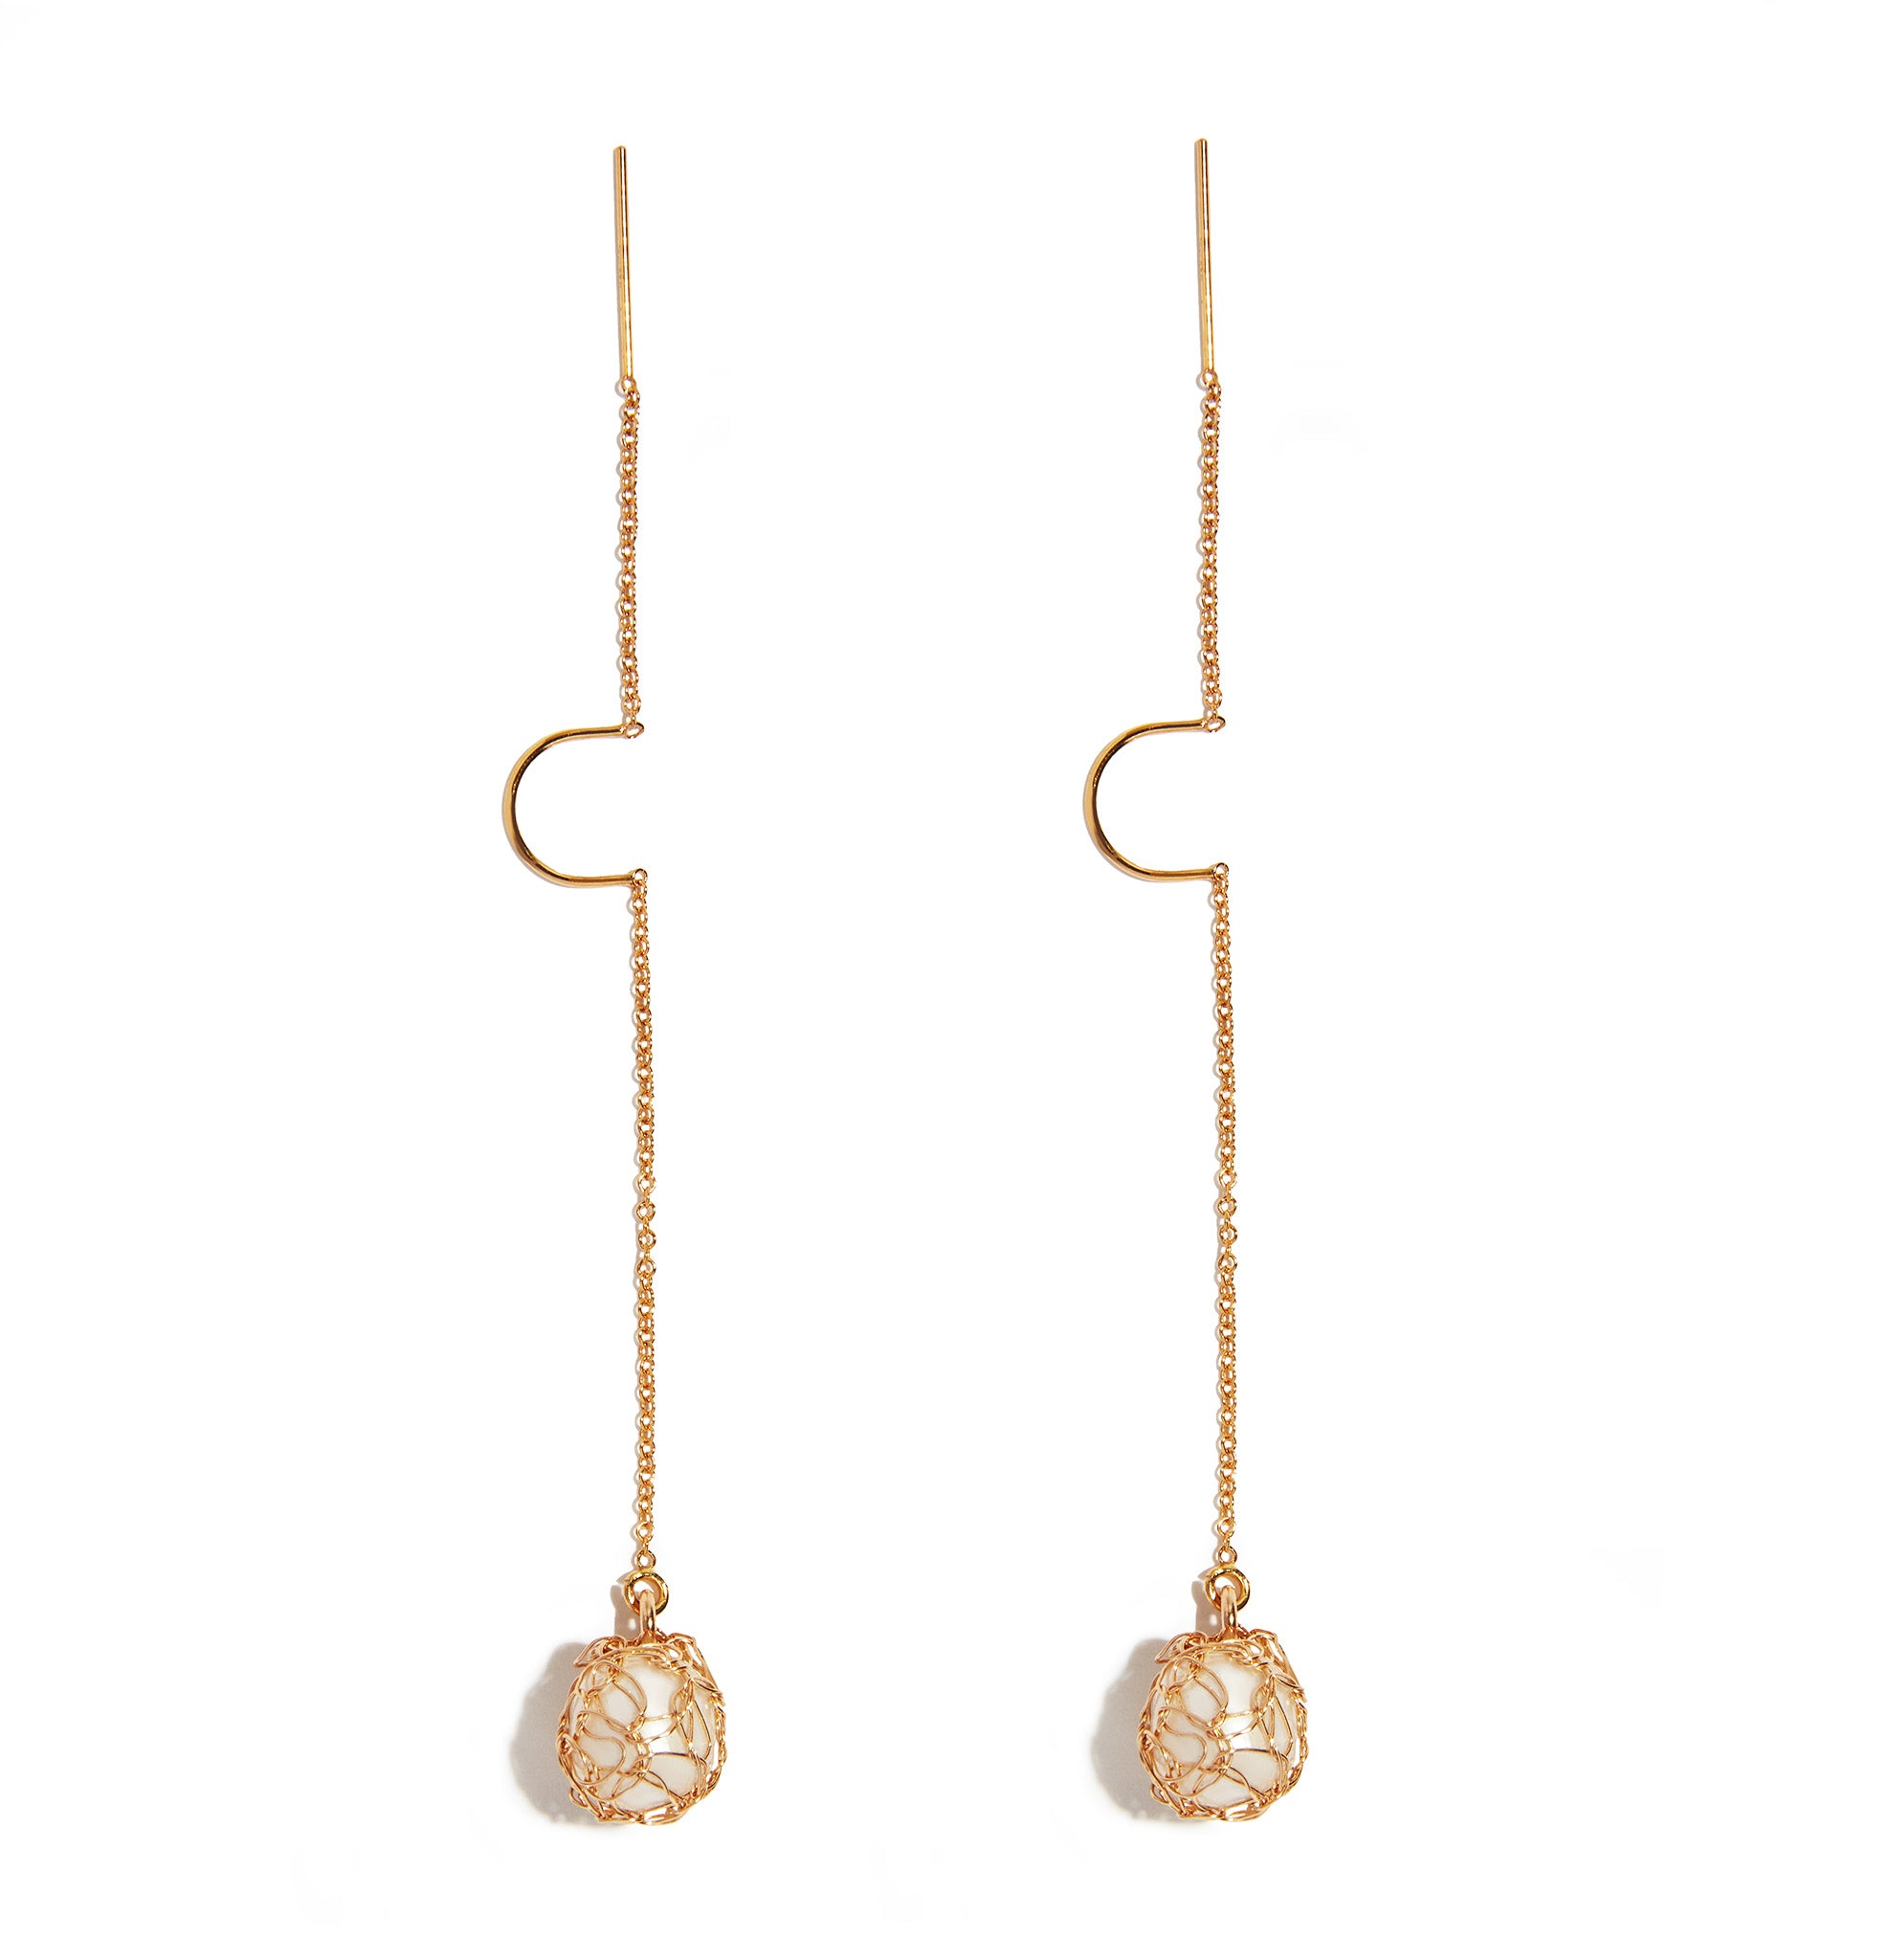 Pearl Dangle Treader Earring featuring a timeless design with lustrous pearls suspended delicately. Crafted with elegance, showcasing 14ct gold-filled accents, adding a touch of sophistication to your look.